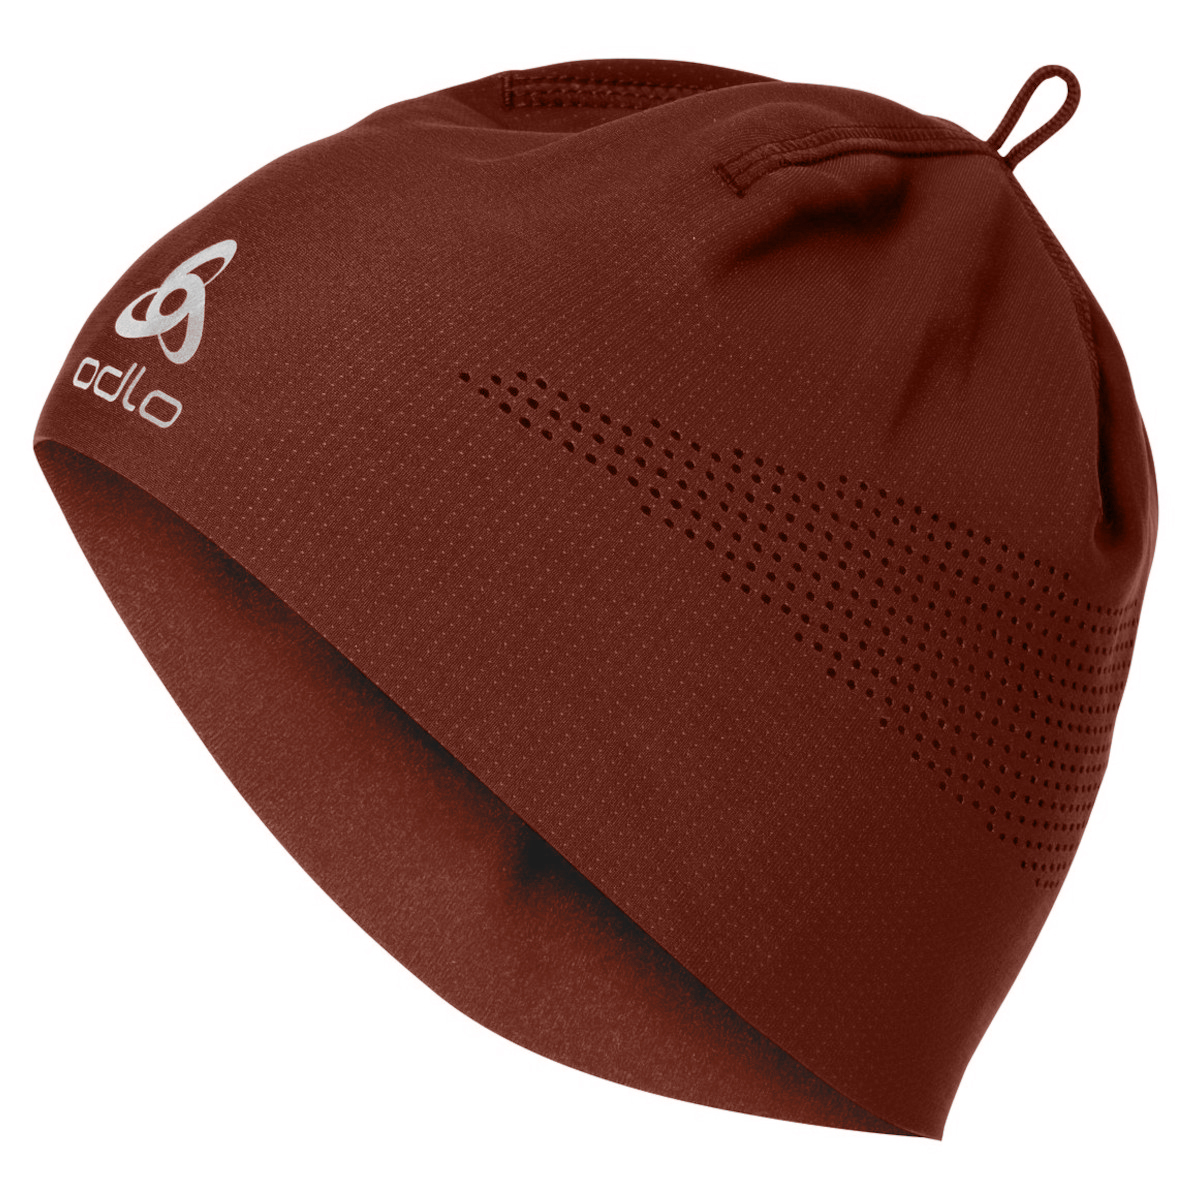 Picture of Odlo Move Light Hat - spiced apple